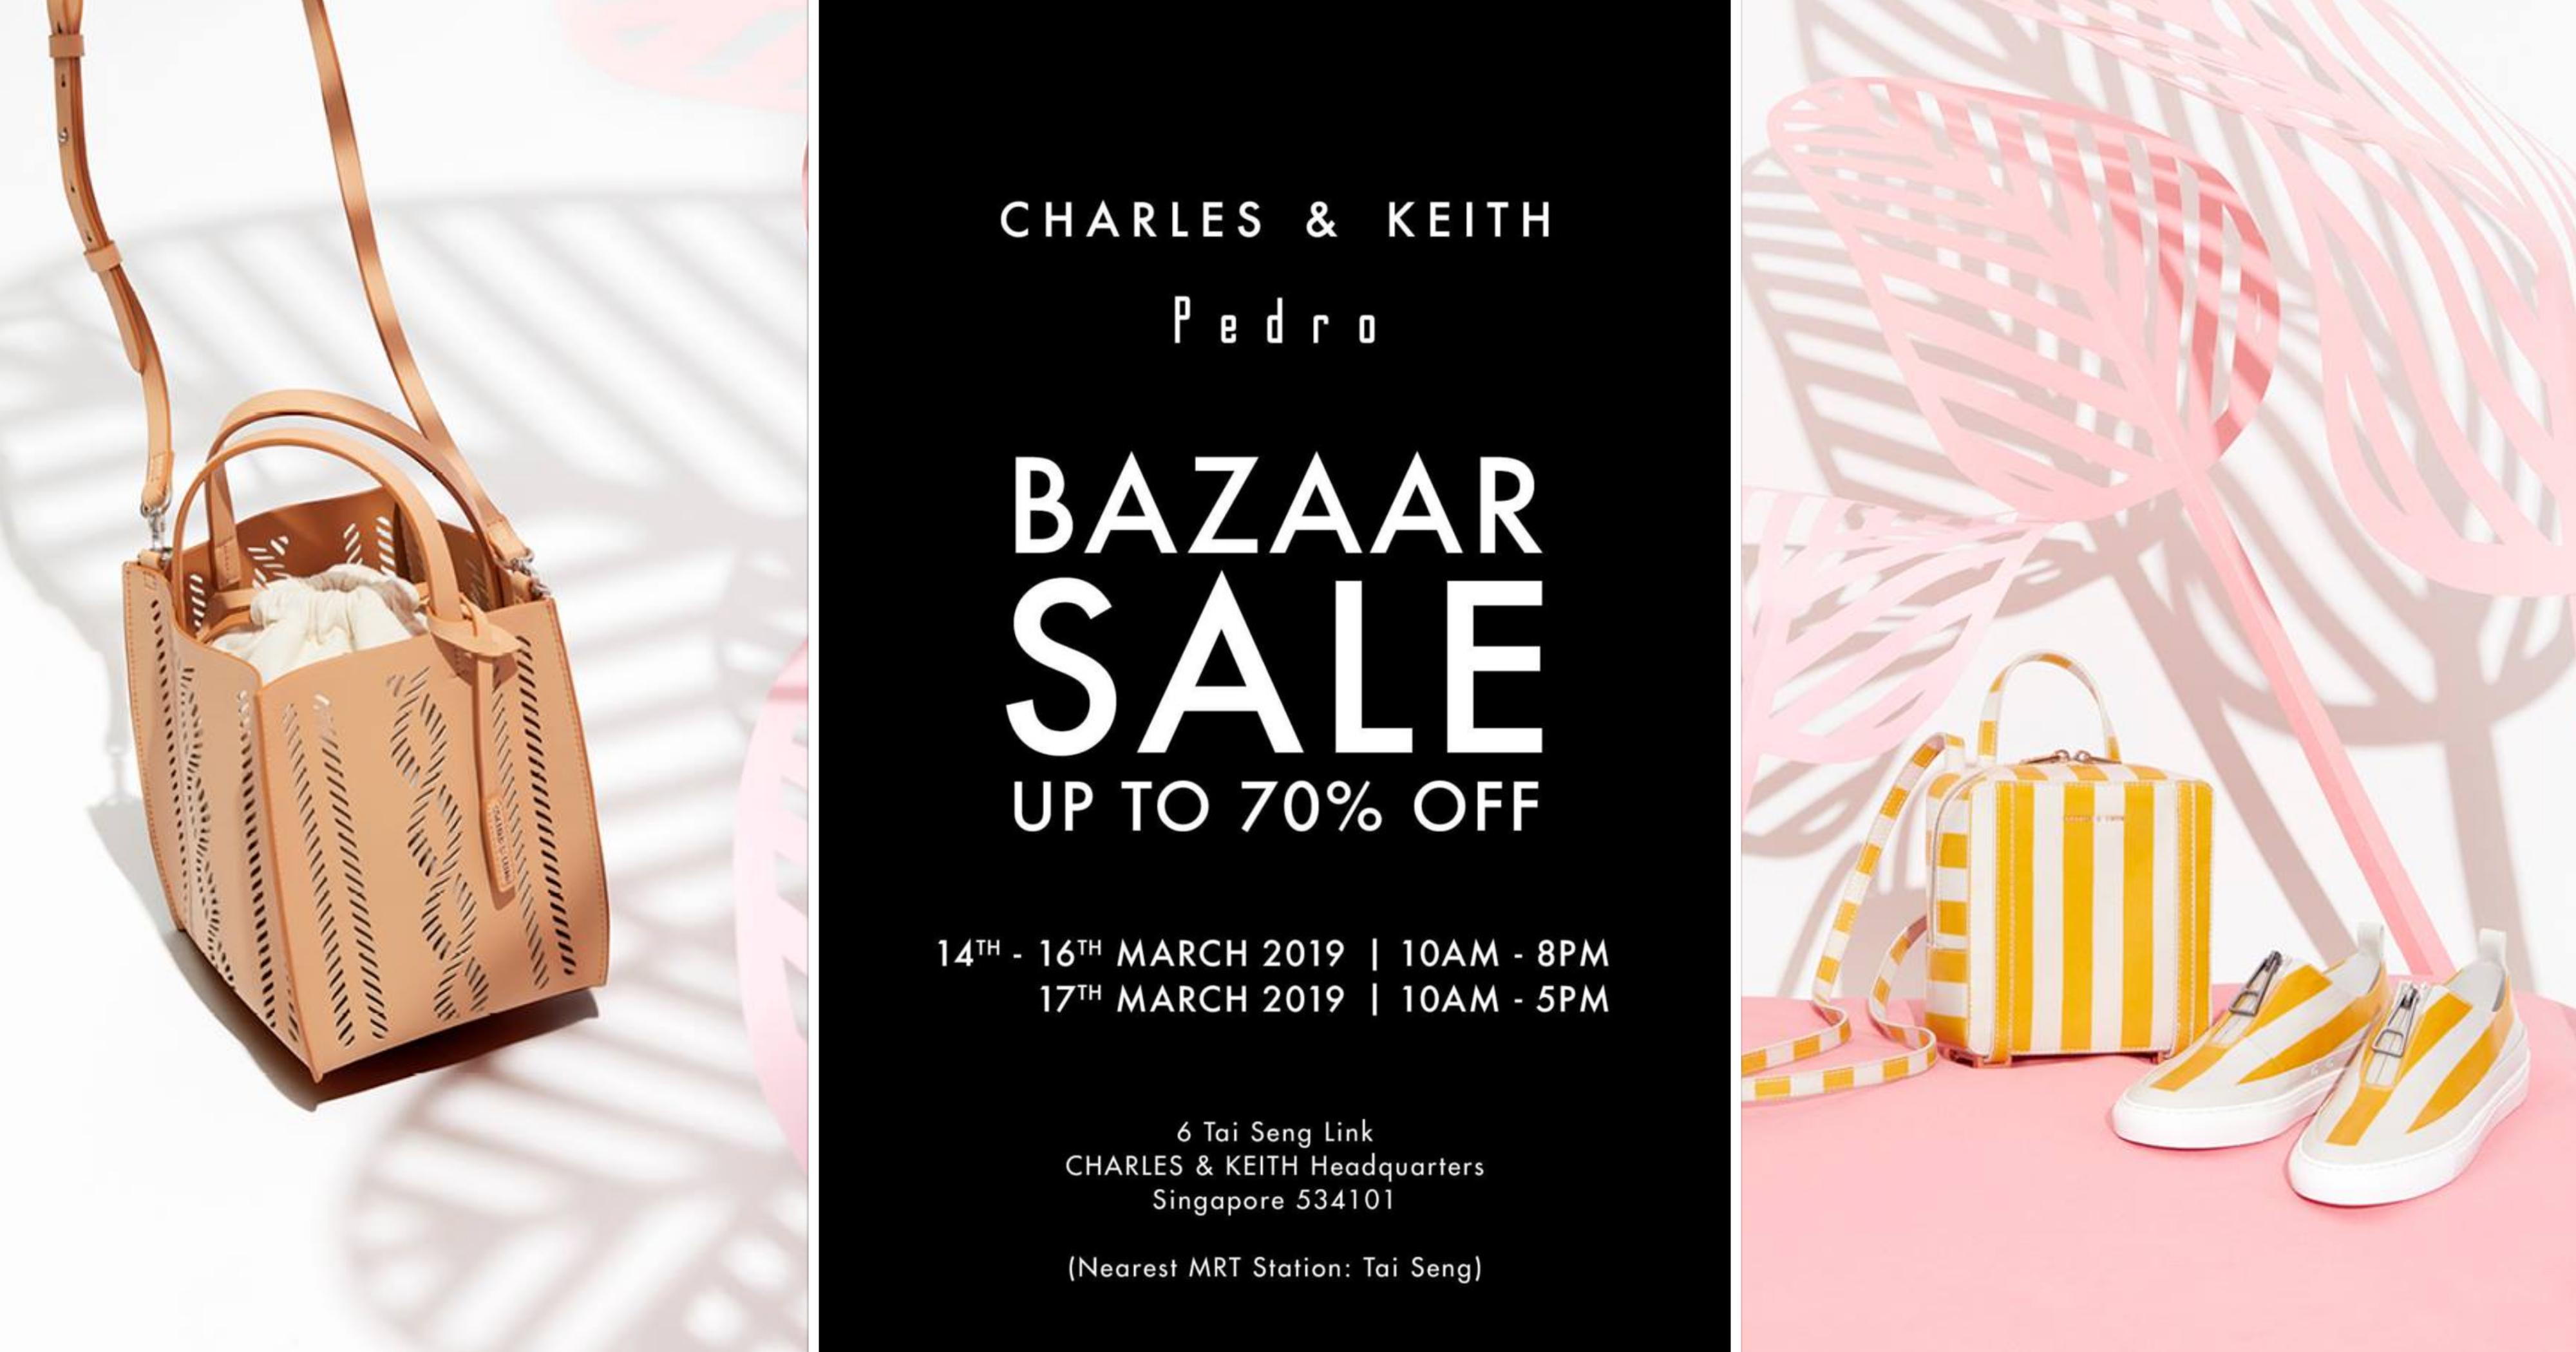 Charles & Keith now having a Bazaar Sale at their building in Tai Seng.  Lots of shoes up to 70% off